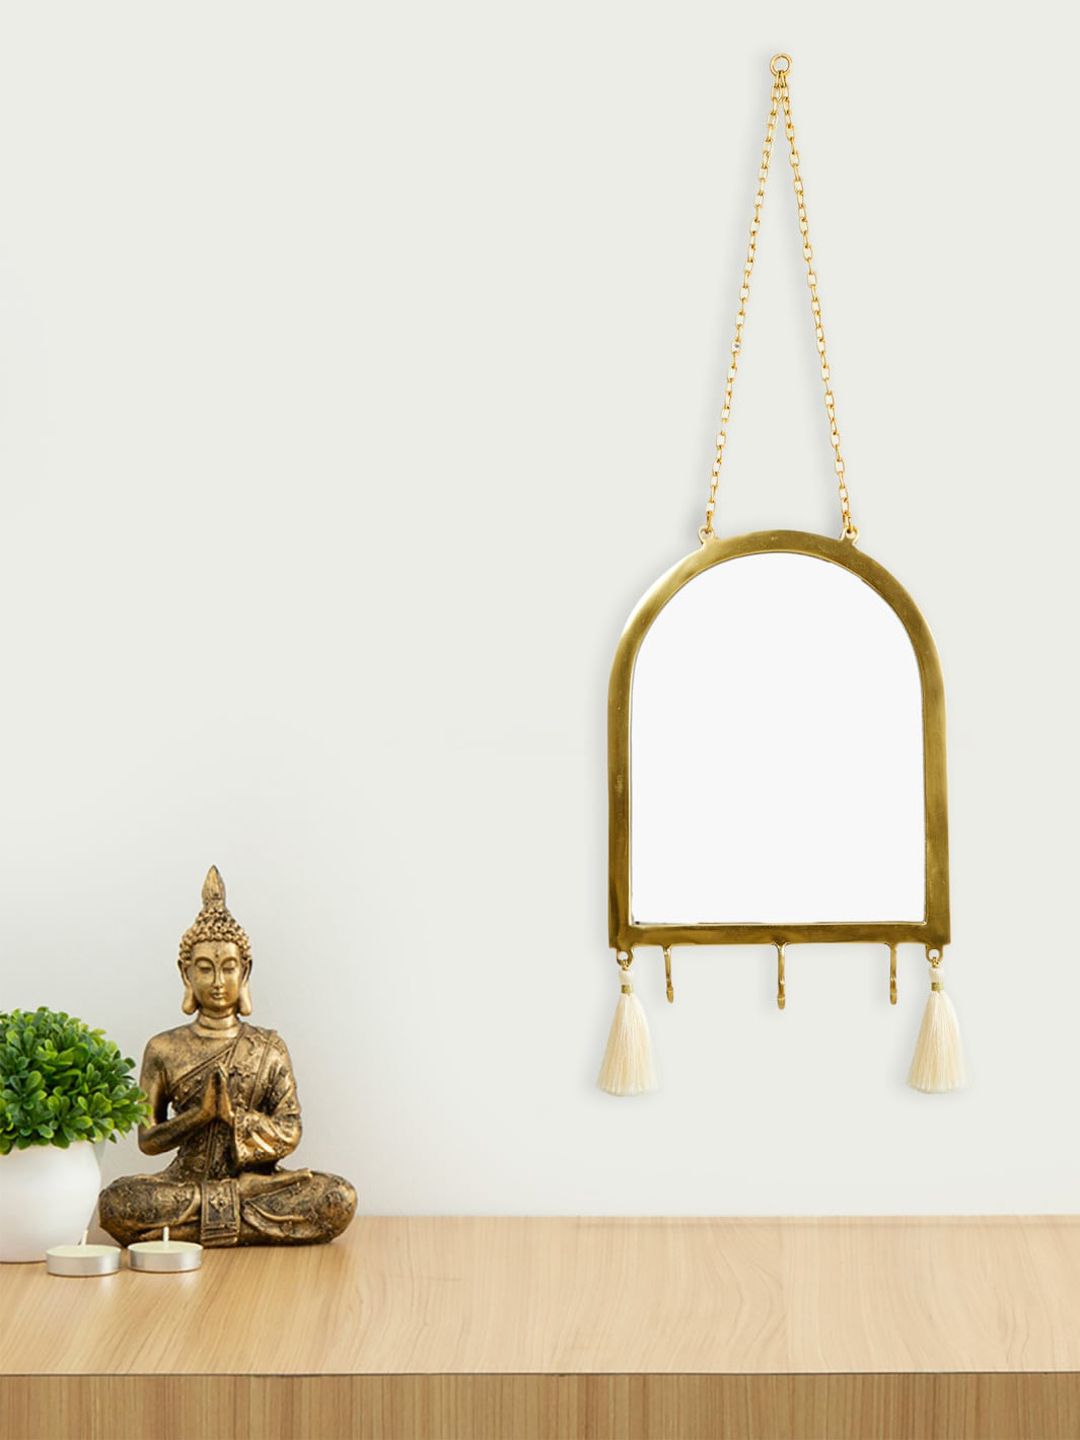 Home Centre Gold-Toned Eternity Decor Mirror with Hooks and Chain Price in India